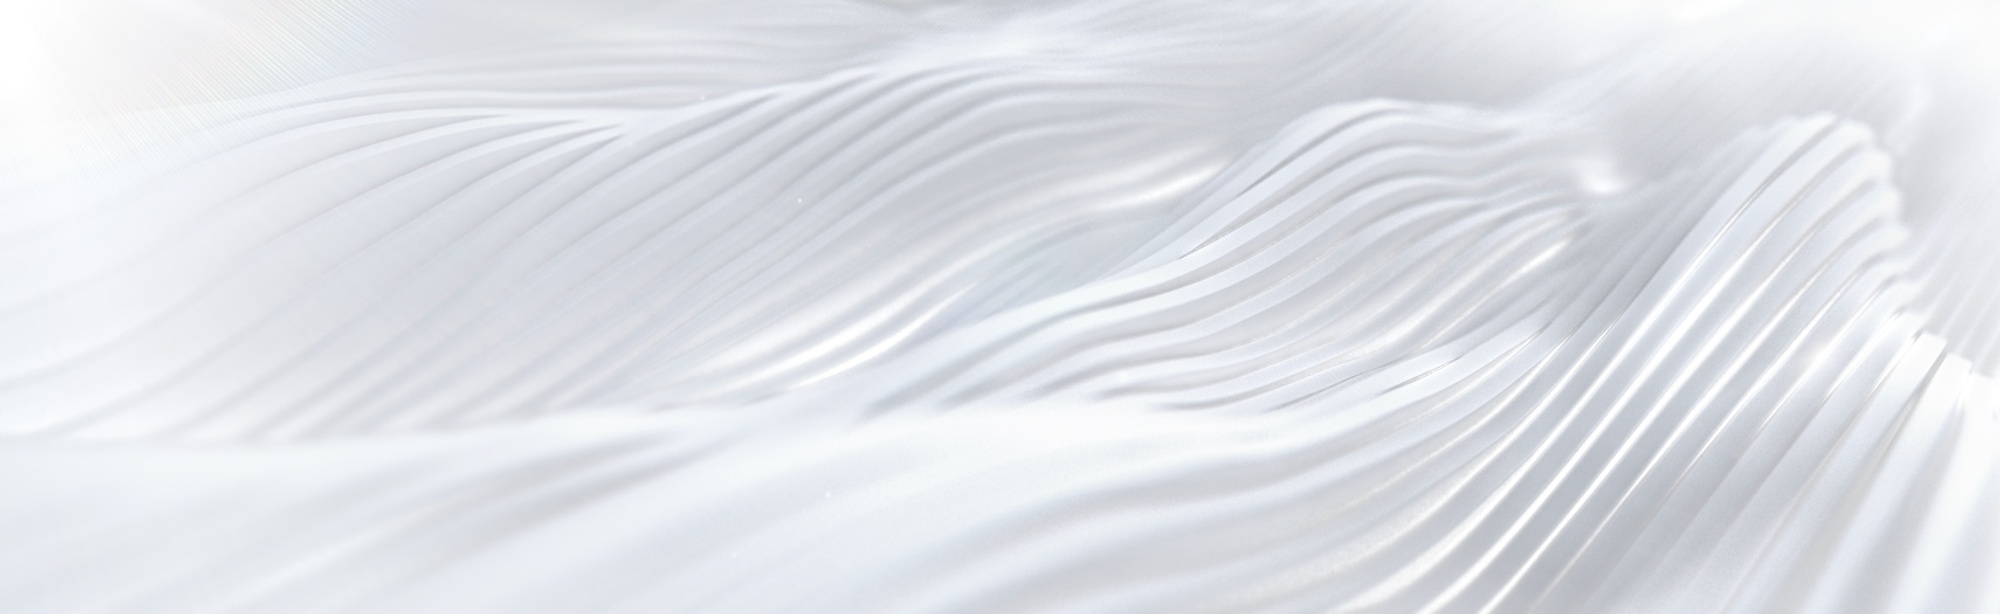 Render of smooth, layered waves of white shapes